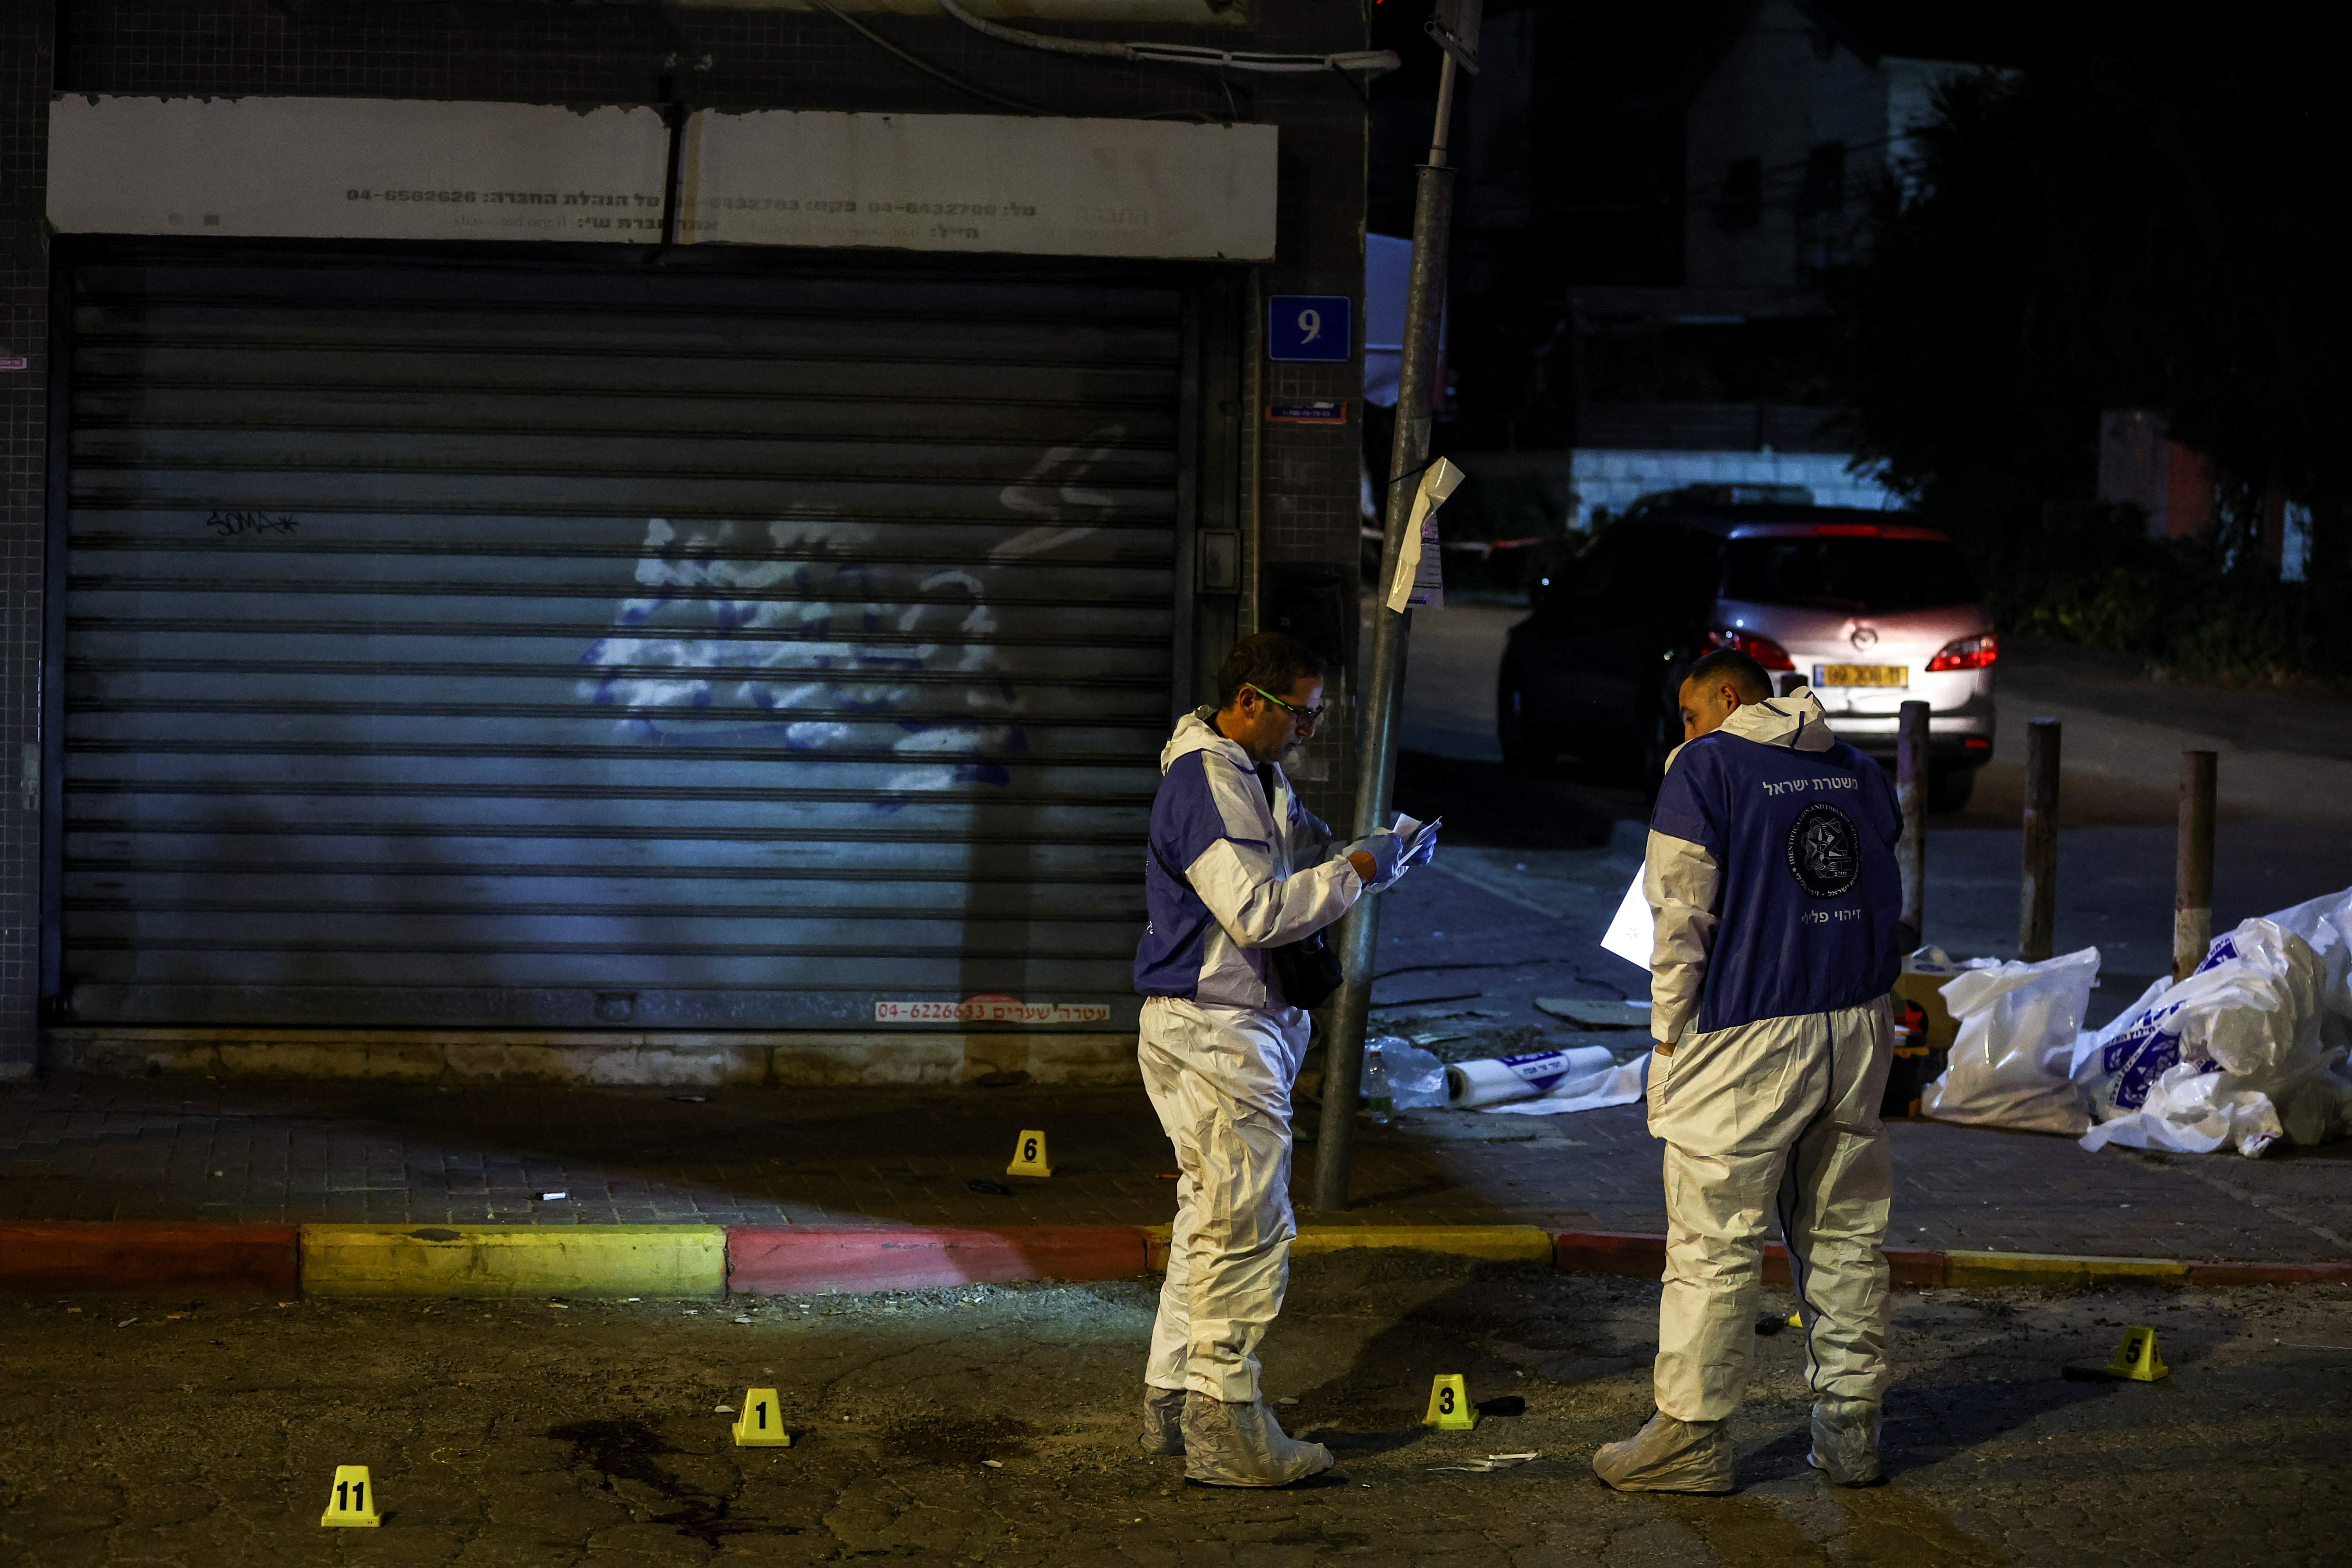 Israeli police forensics experts work at the scene of an attack in which people were killed by gunmen on a main street in Hadera, Israel